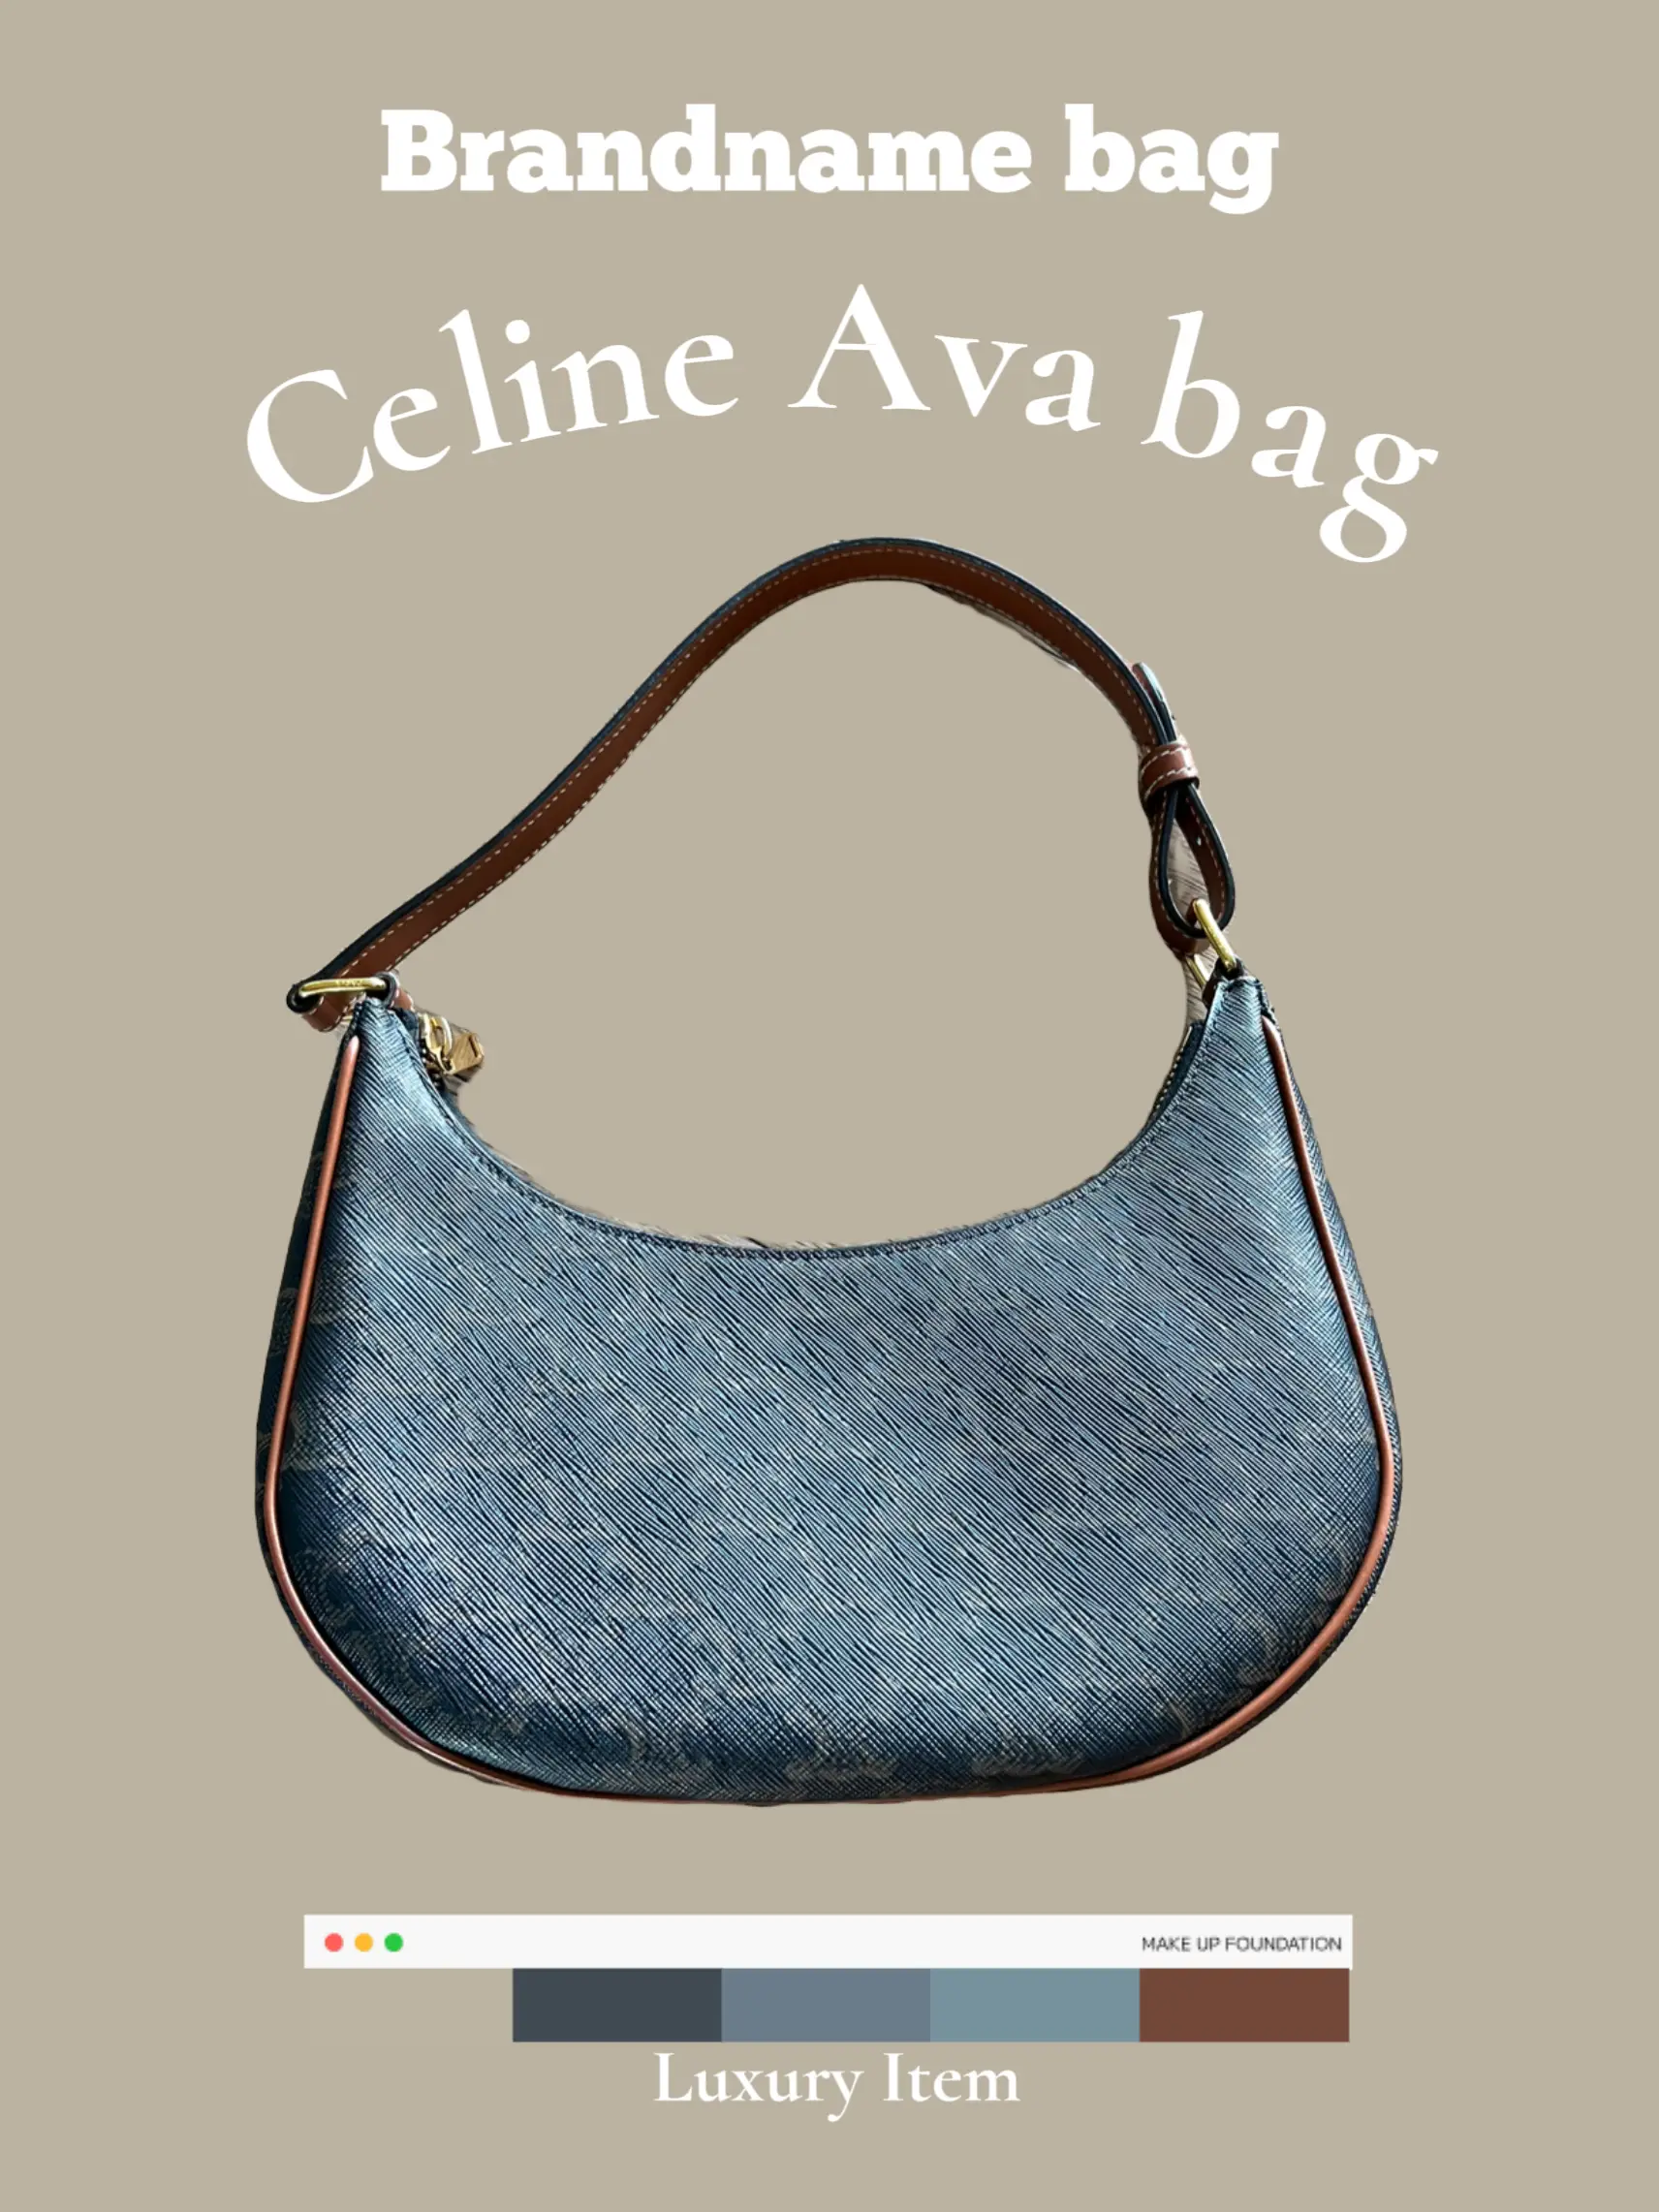 Everything You Need To Know About Celine's New Ava Bag